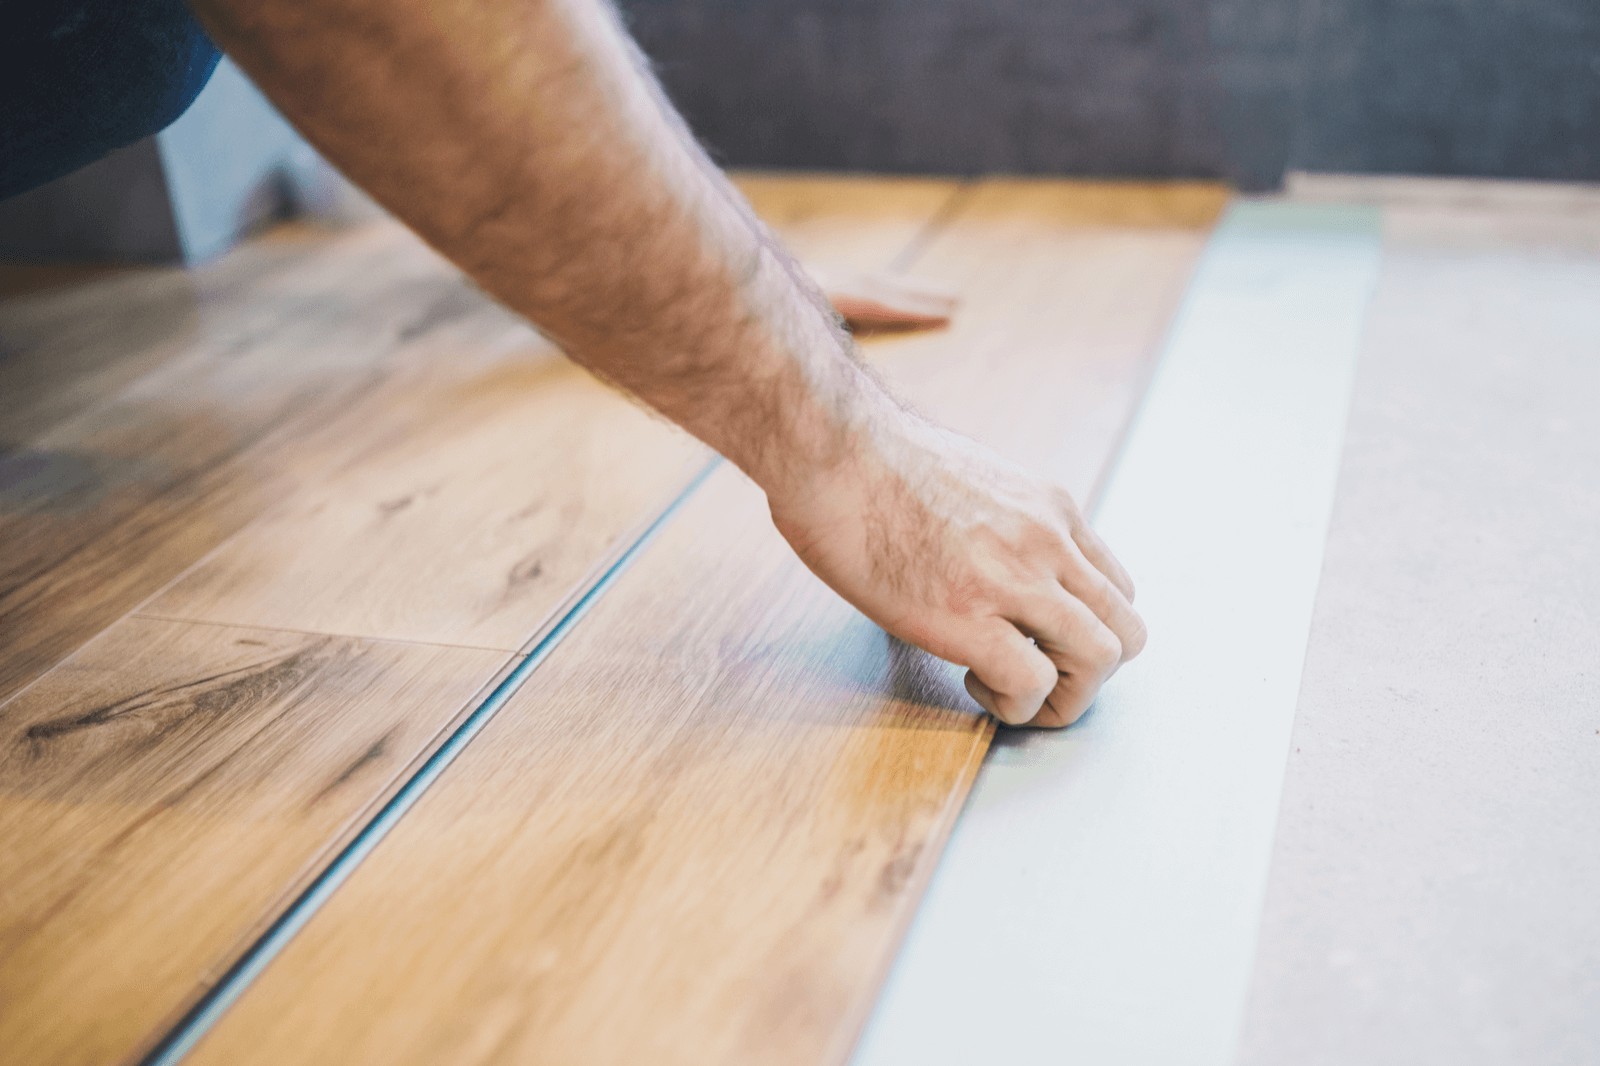 Man's hands laying a wooden board as flooring